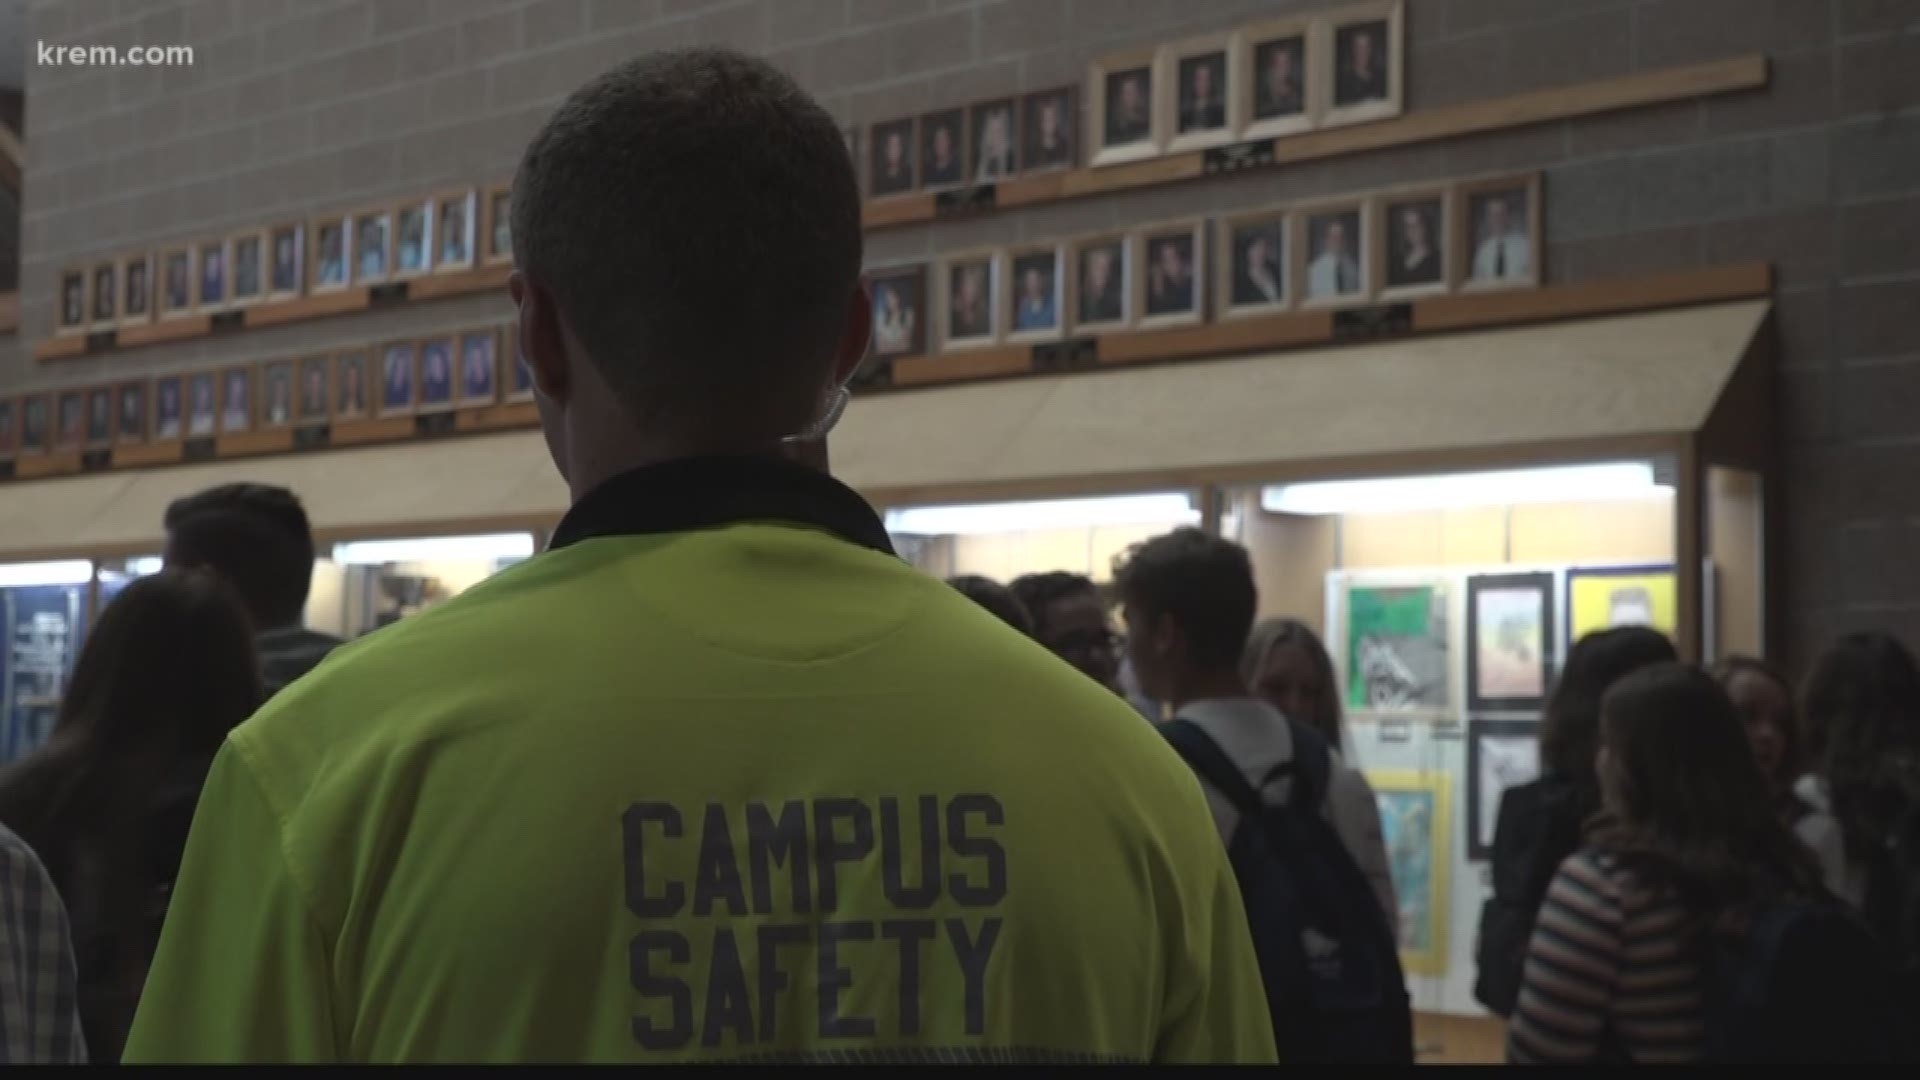 KREM's Shayna Waltower met with the new campus safety officers at Coeur d'Alene schools for the 2019-20 school year.